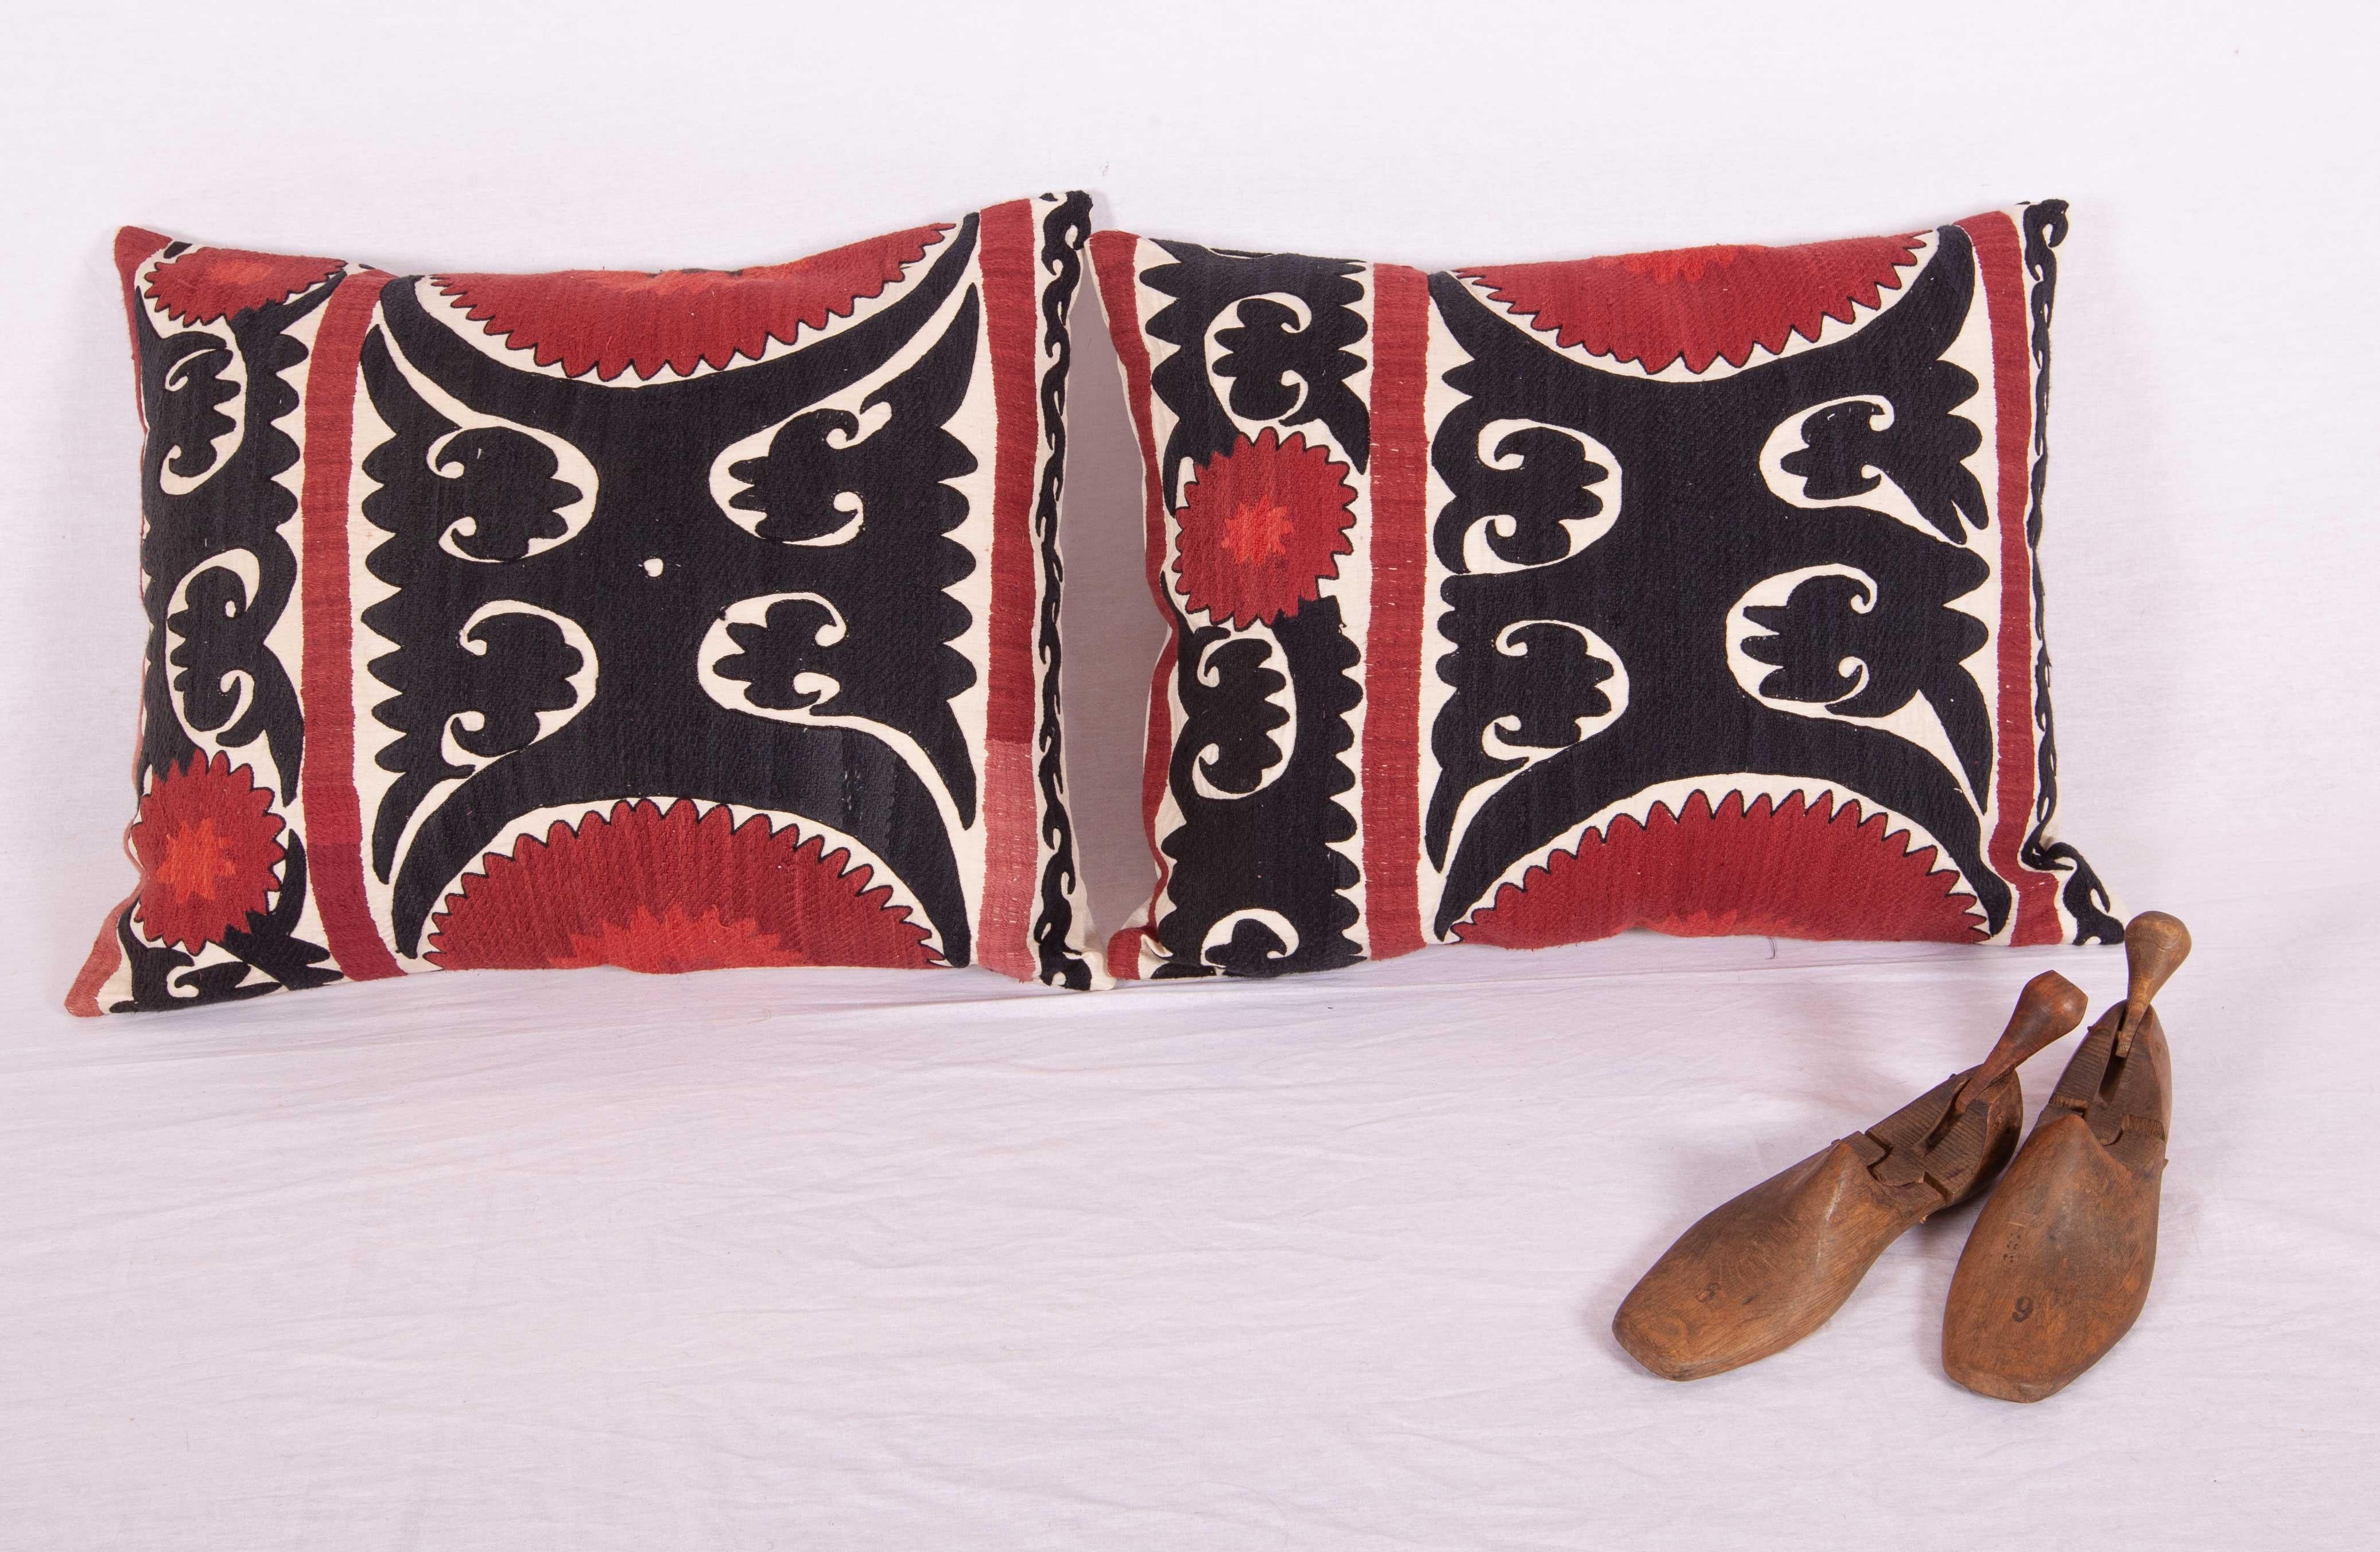 20th Century Pillow/Cushion Cases Fashioned from a Midcentury Suzani